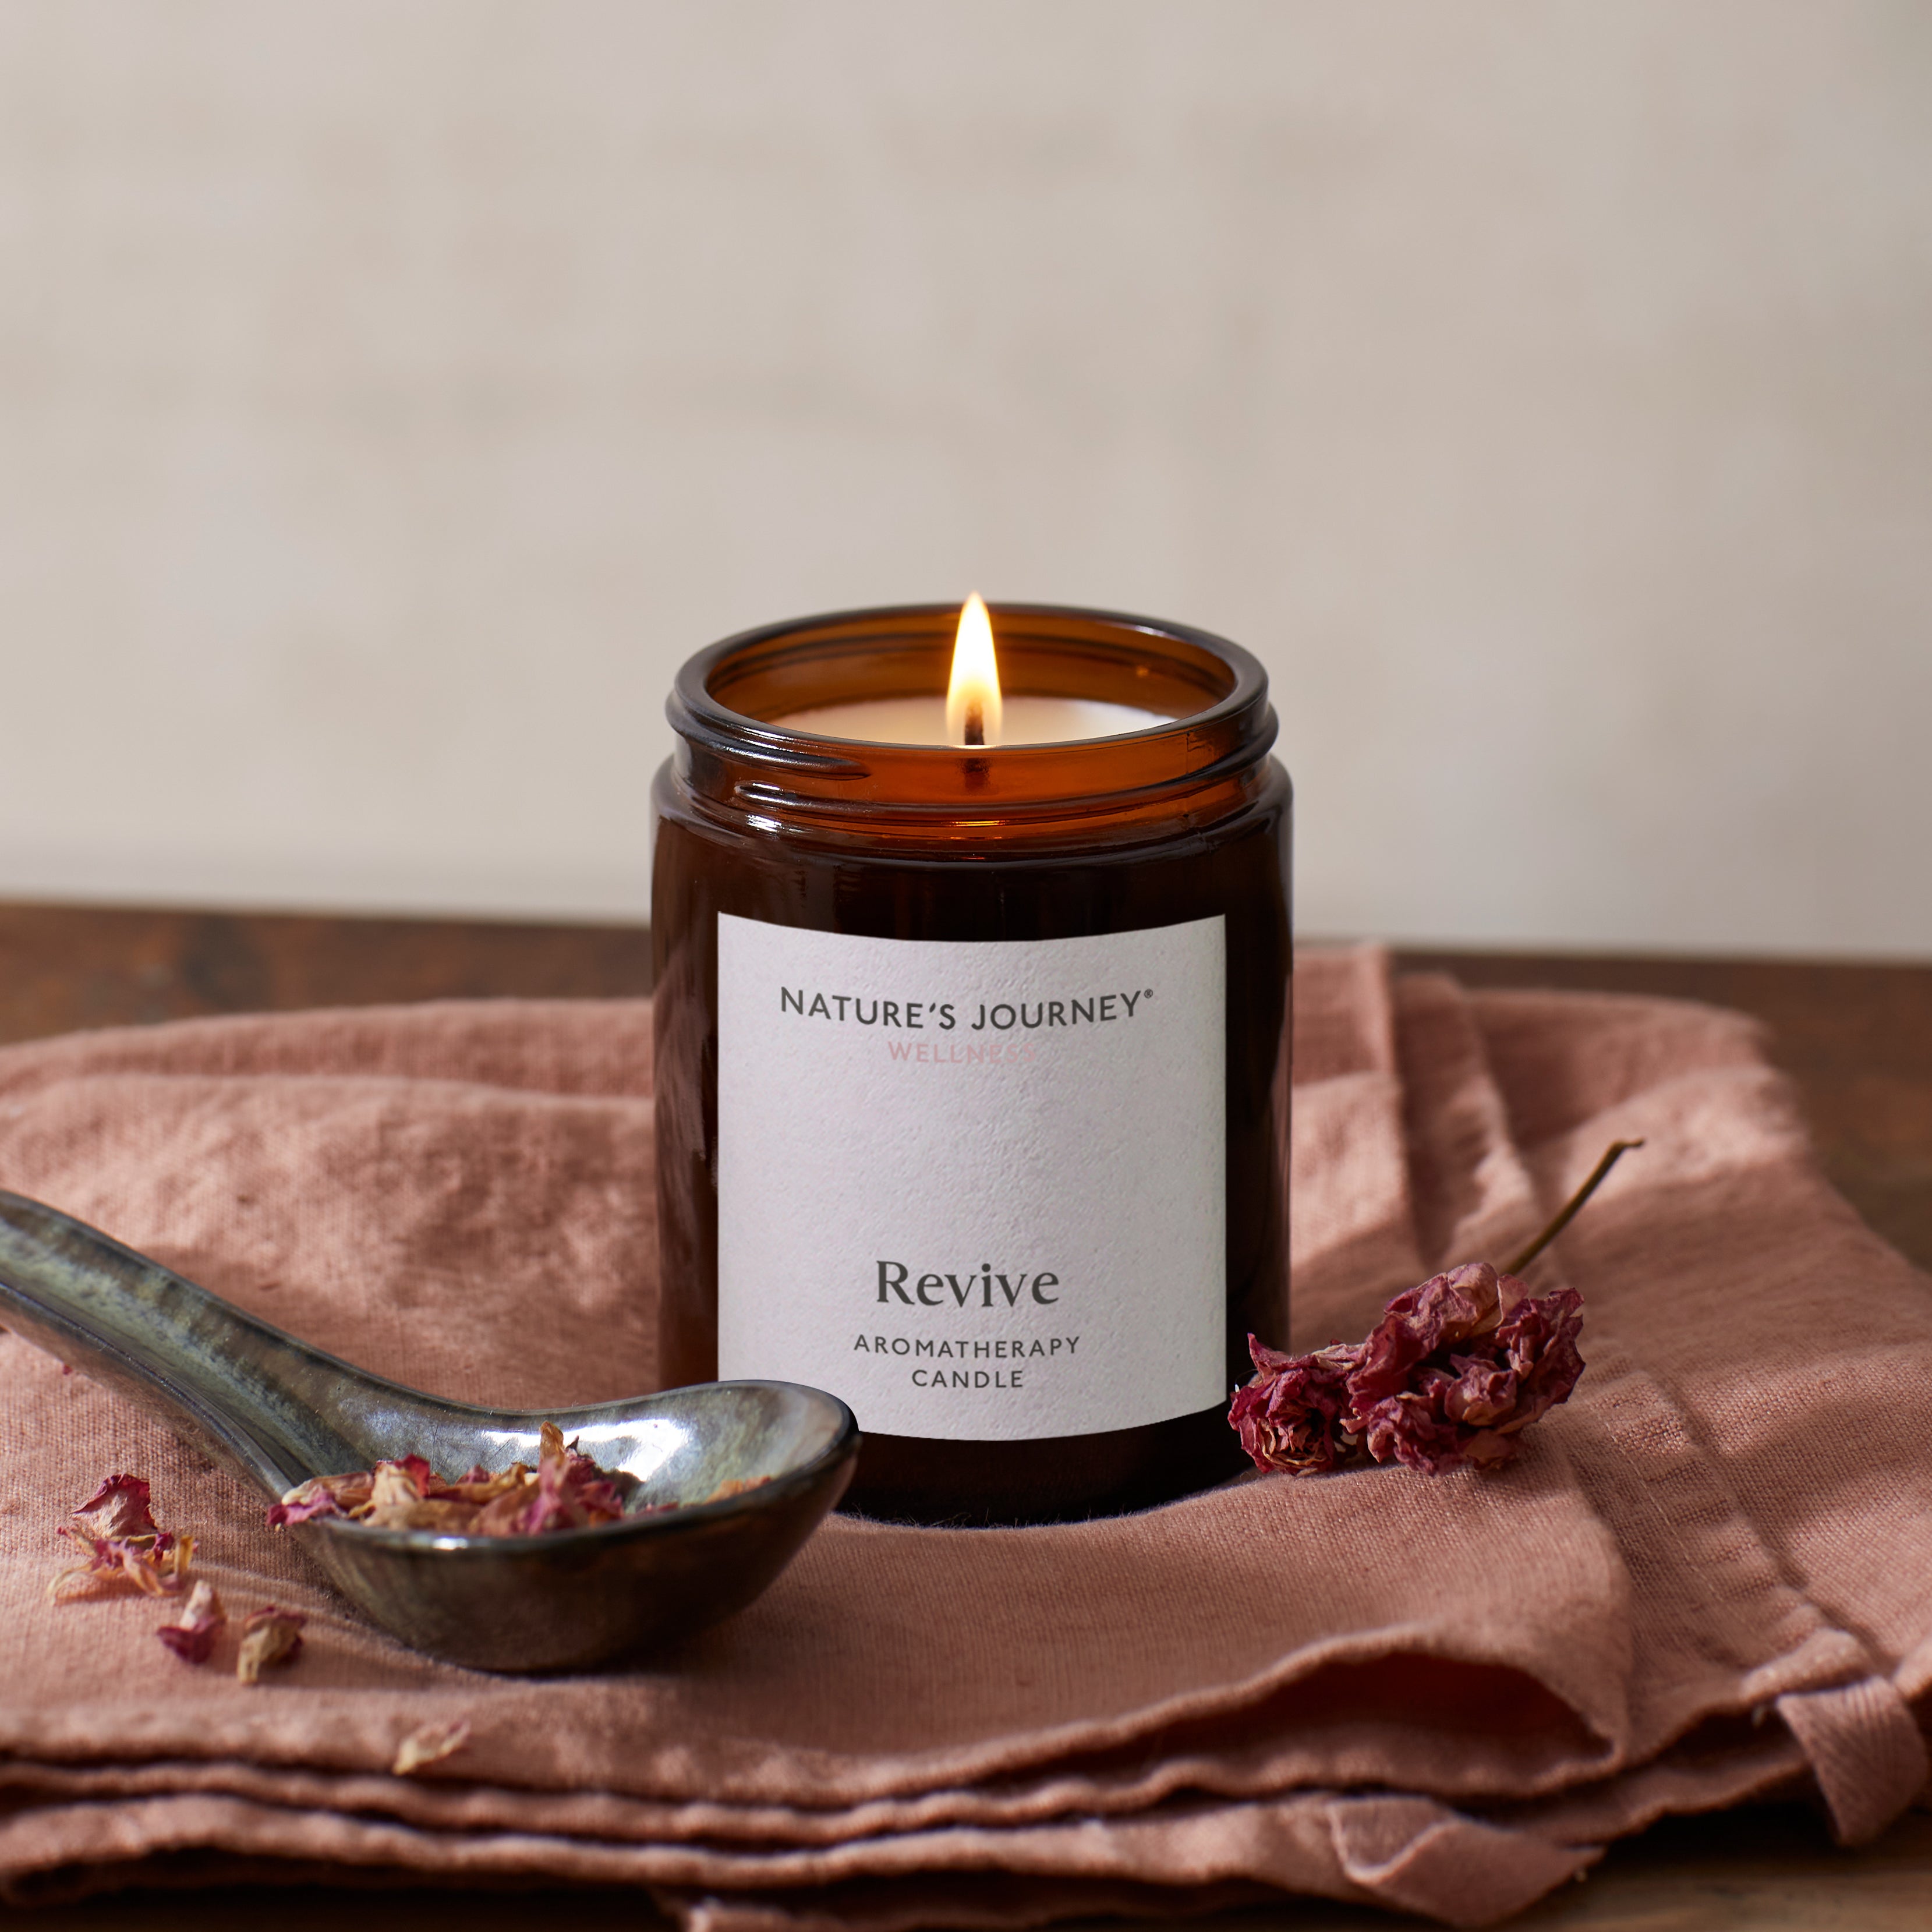 NJ_Revive_Aromatherapy_Candle_Solo_1200x1200_2.jpg